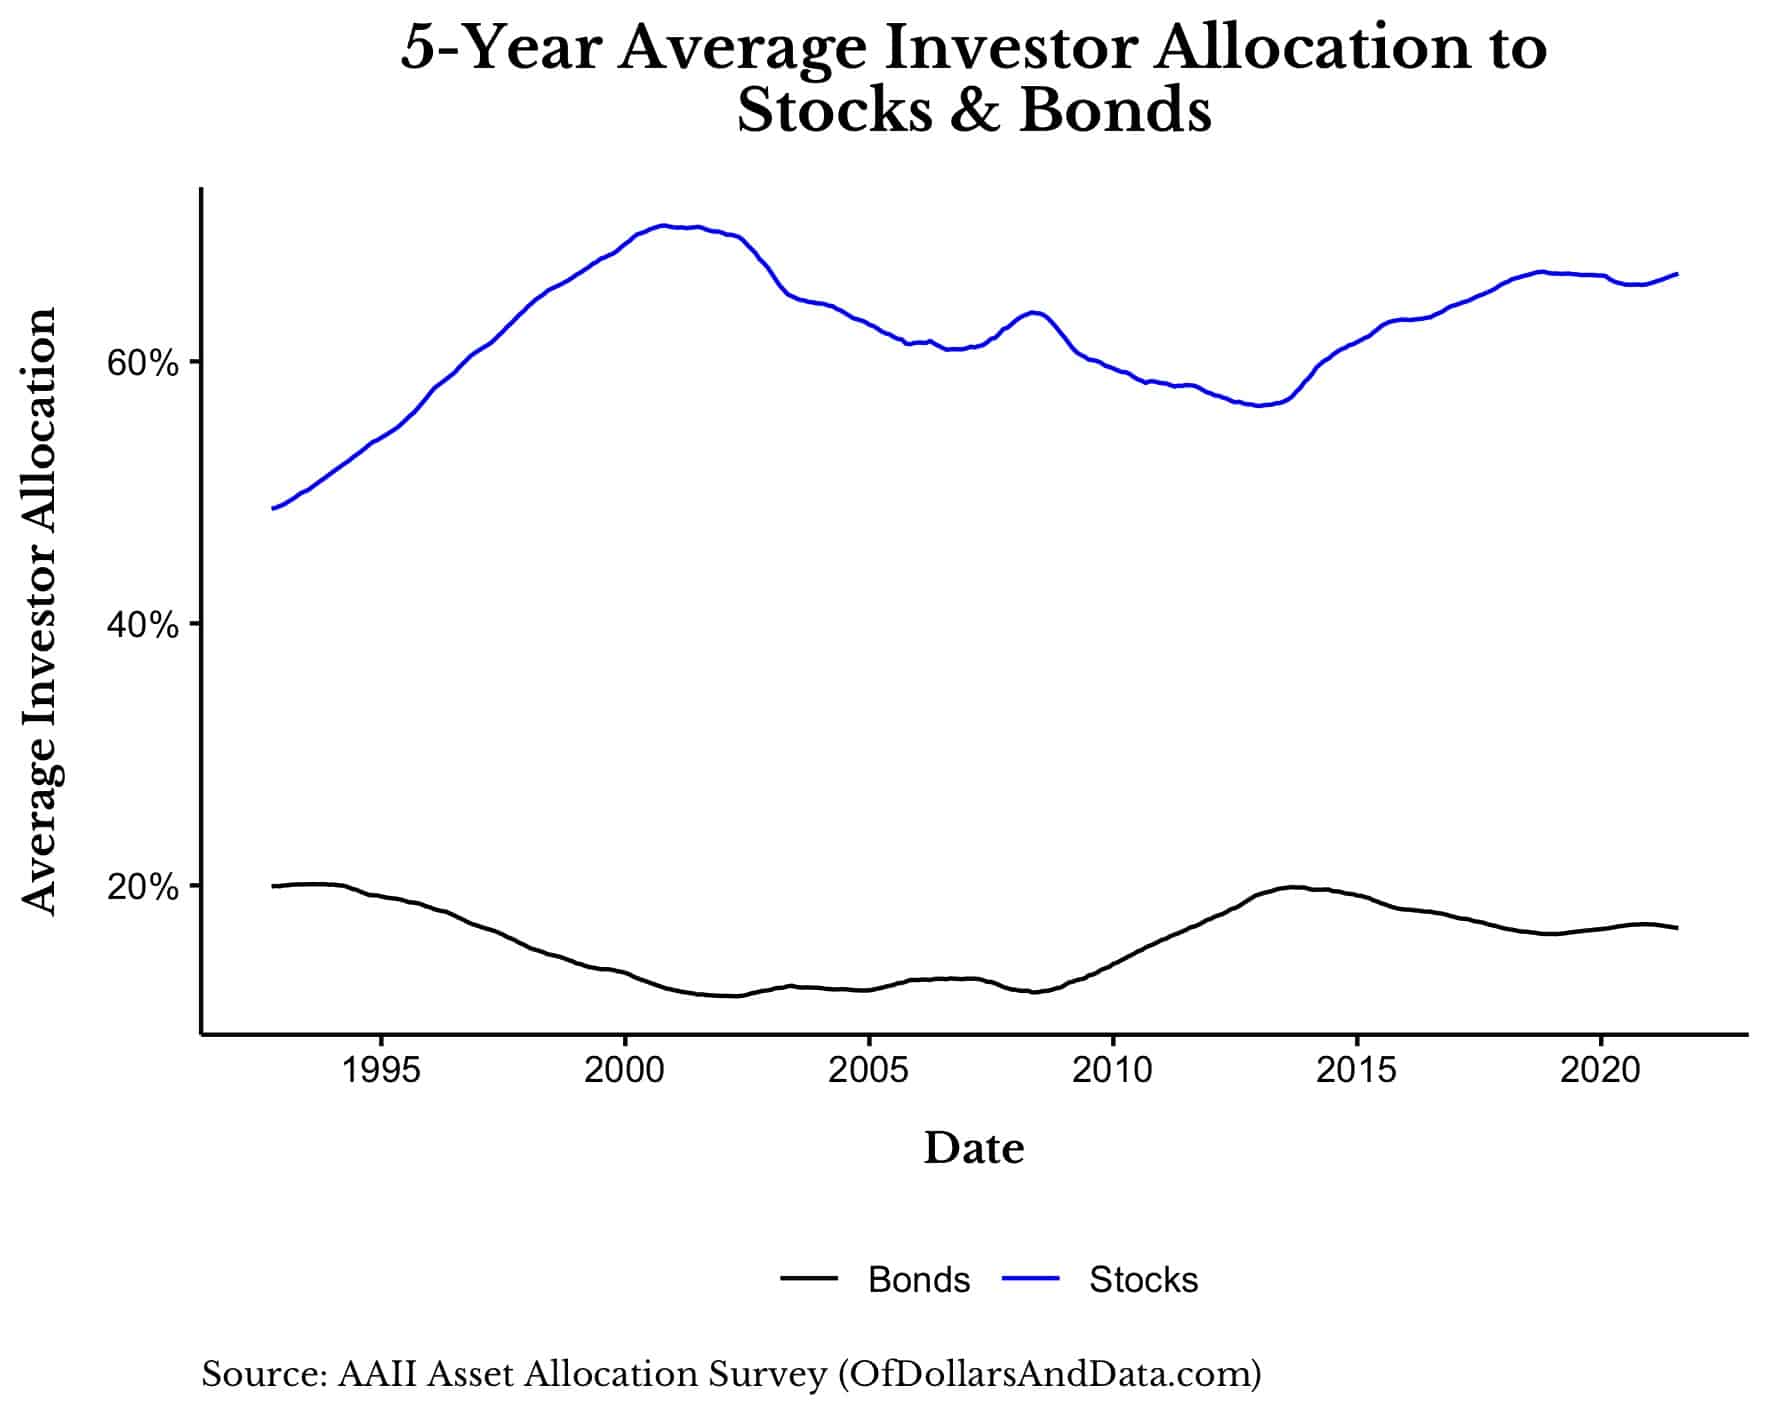 5-year average investor allocation to stocks and bonds from the AAII Asset Allocation Survey